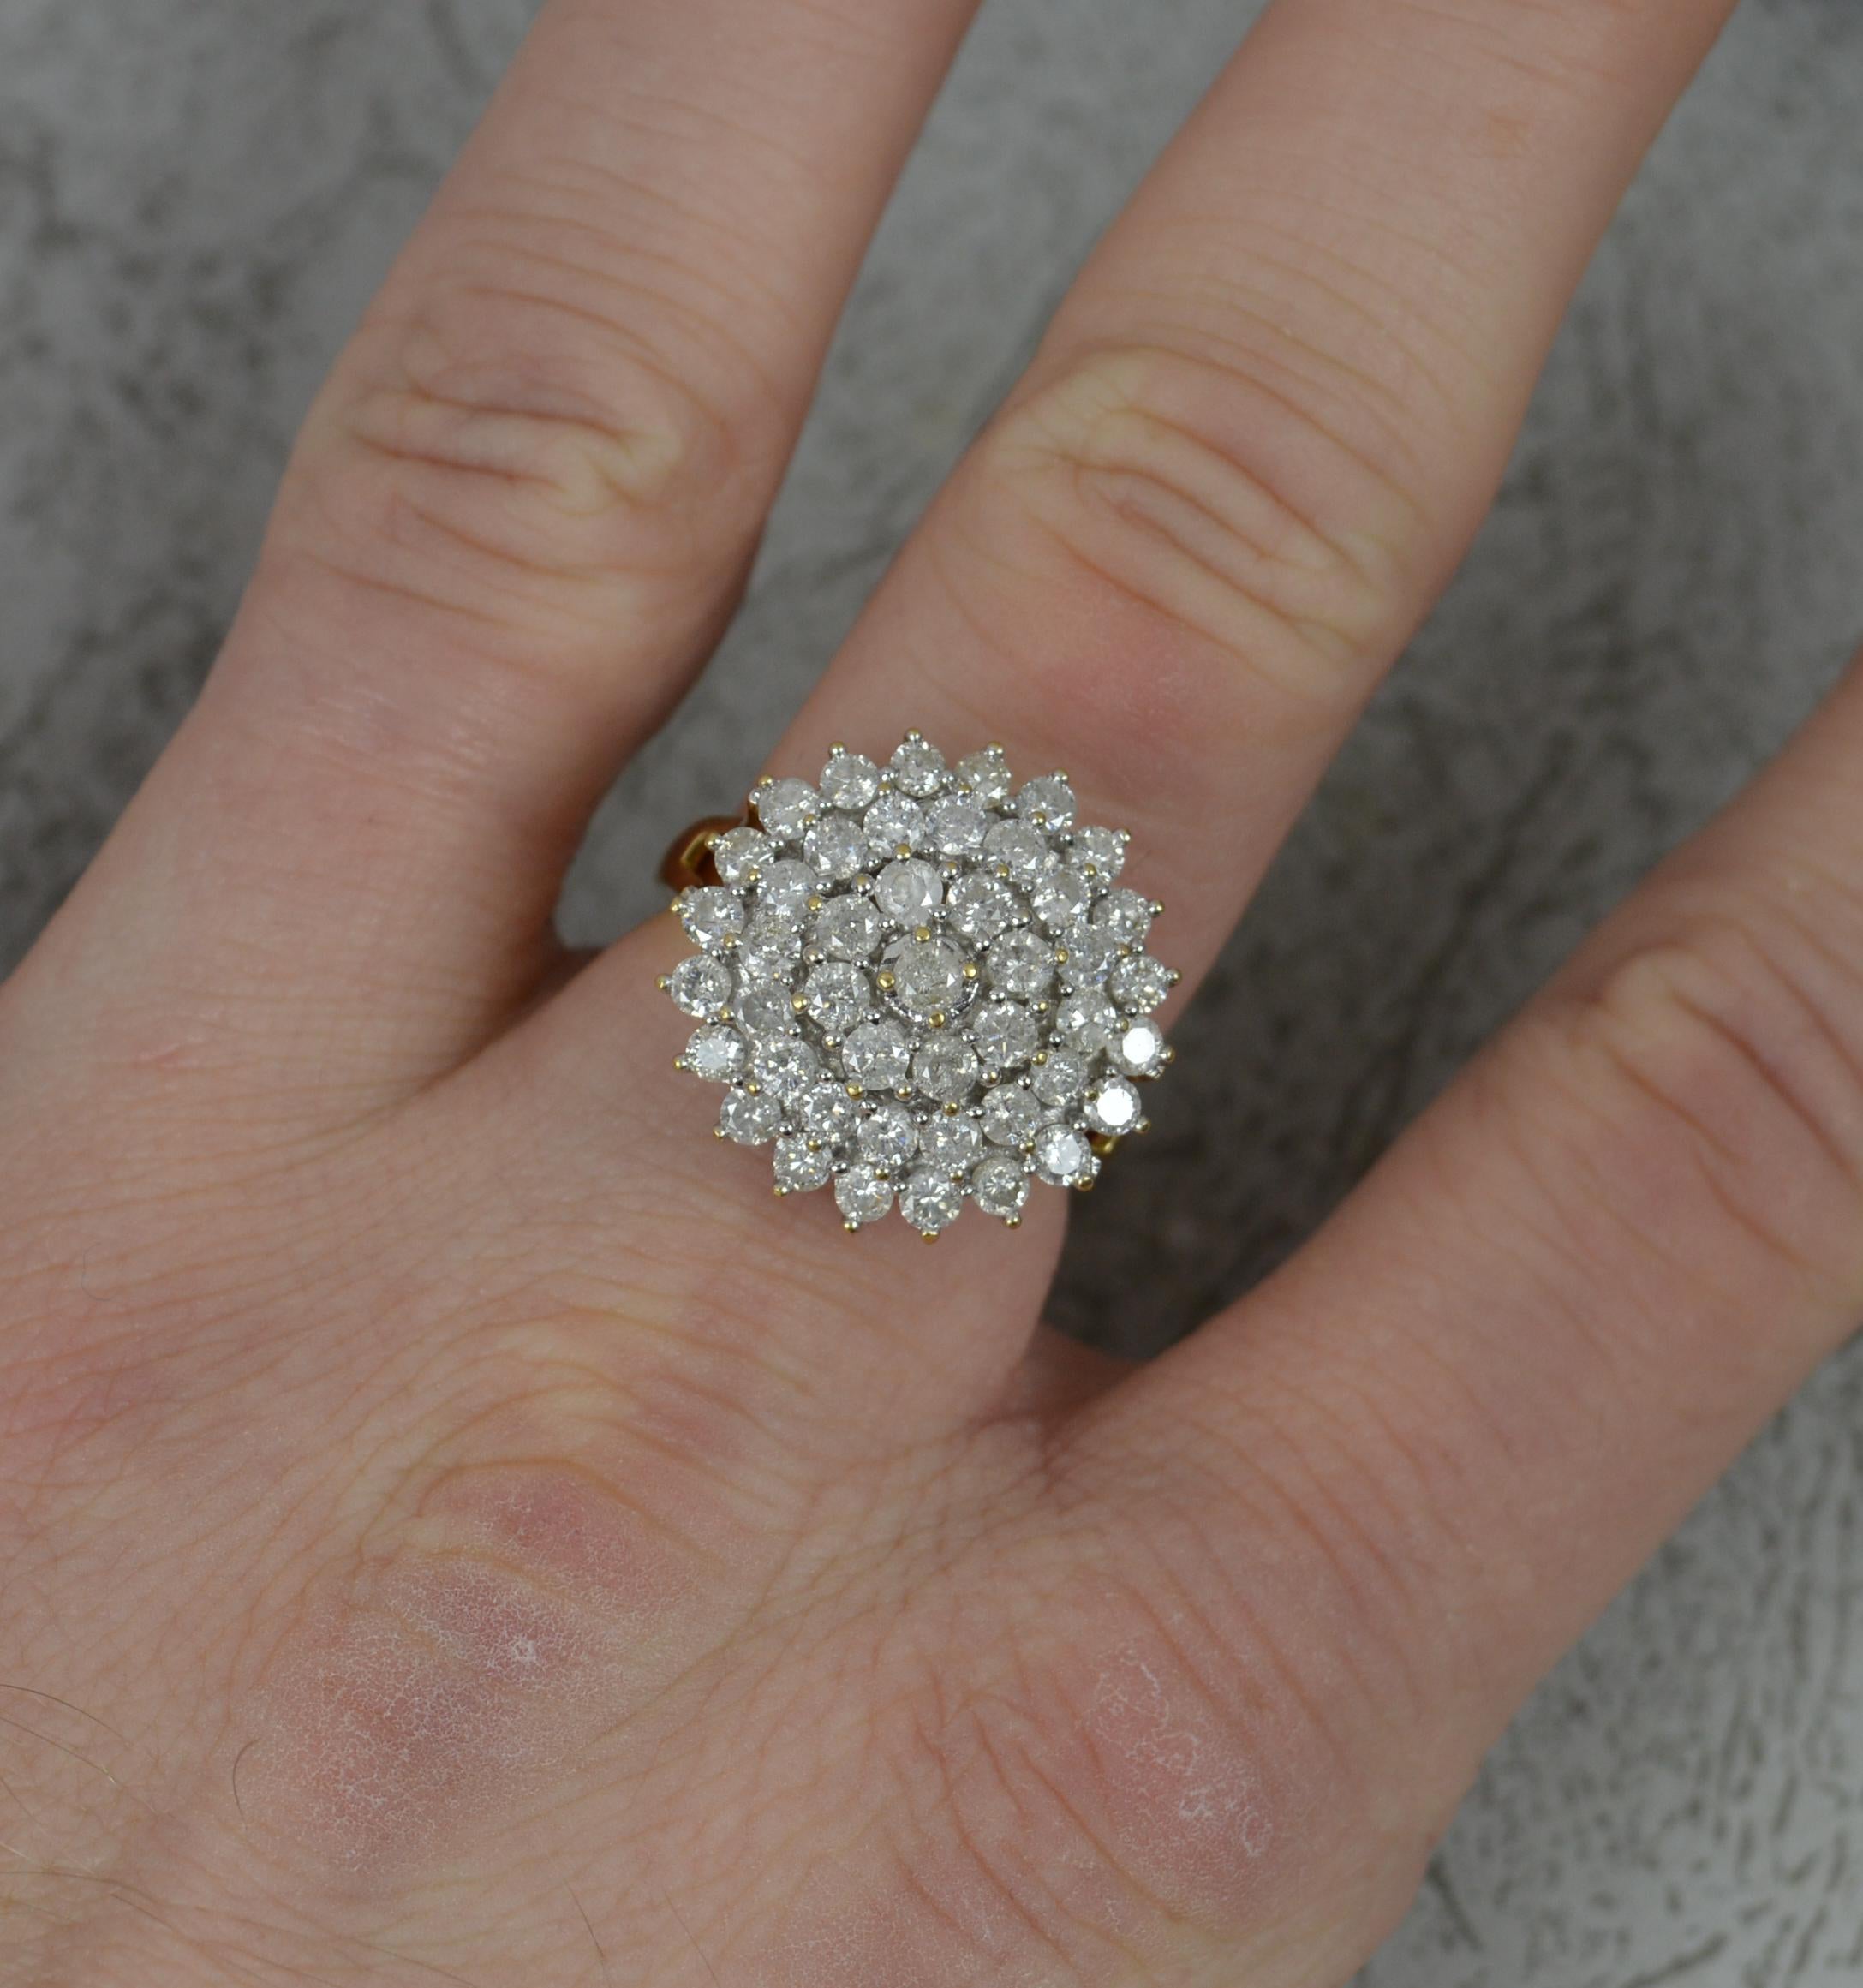 A large natural diamond cluster ring.
Solid 18 carat yellow gold shank and white gold head setting..
Designed with many round brilliant cut natural diamonds, a four tier cluster head.
18mm x 18mm cluster head. 
2 carats of natural, sparkly